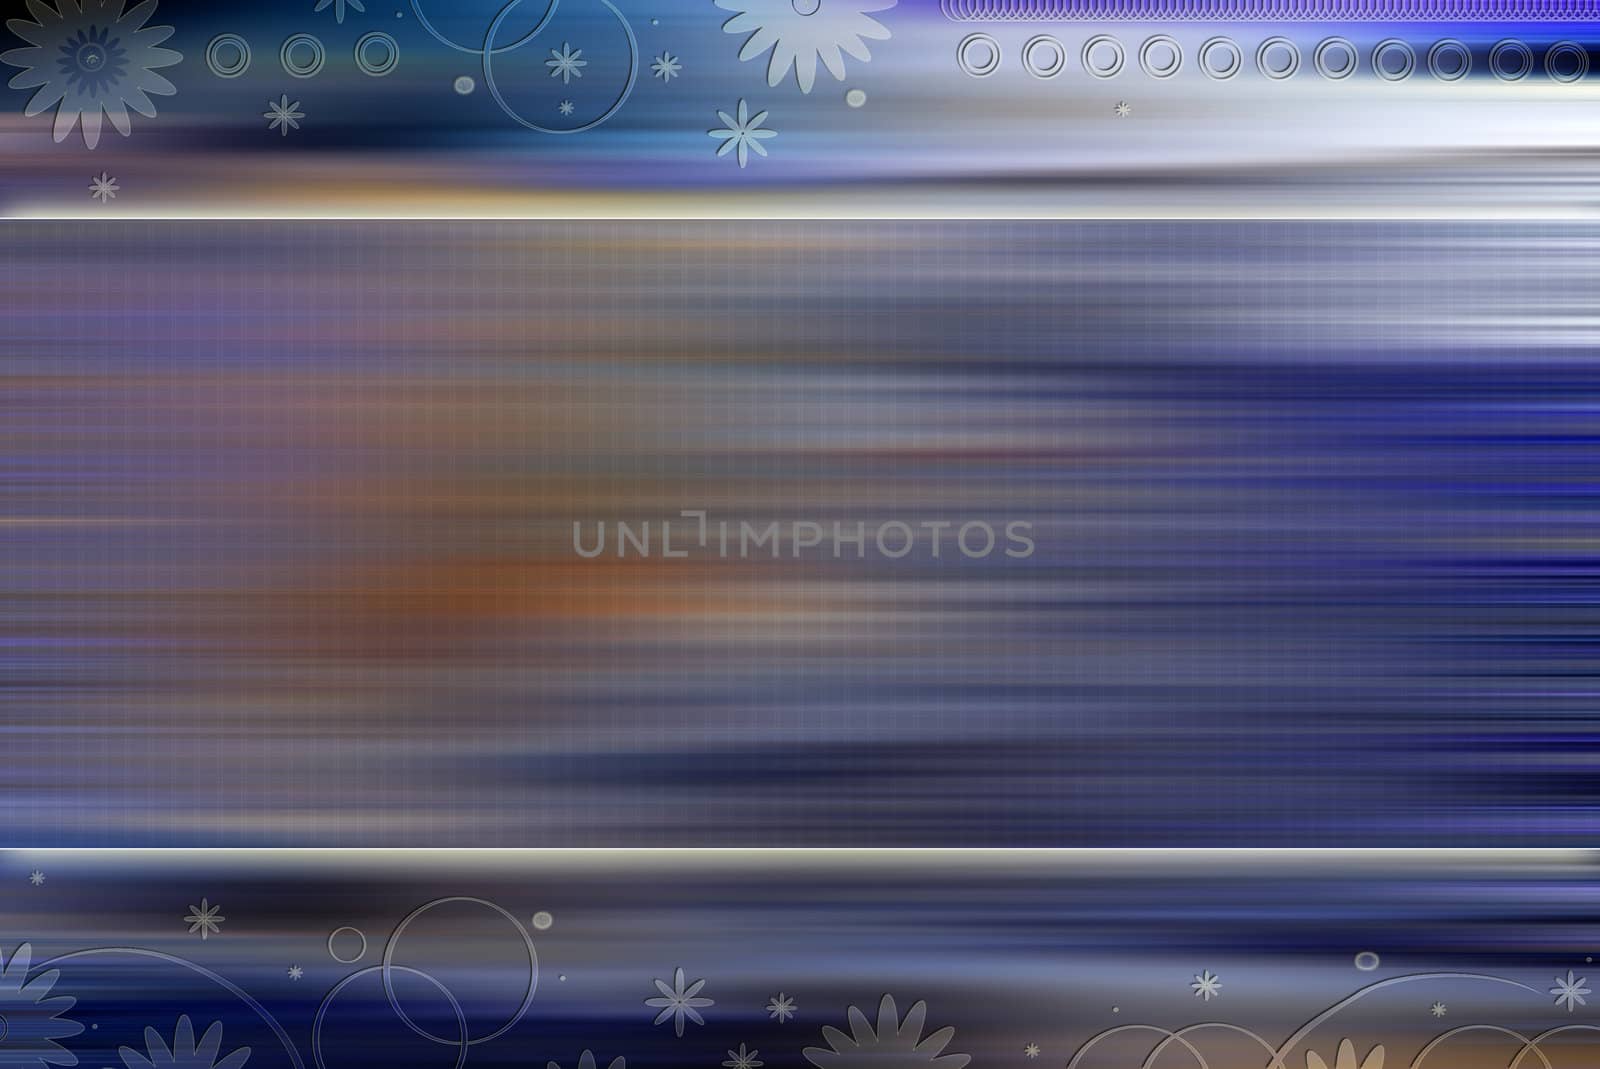 Computer designed abstract background - template